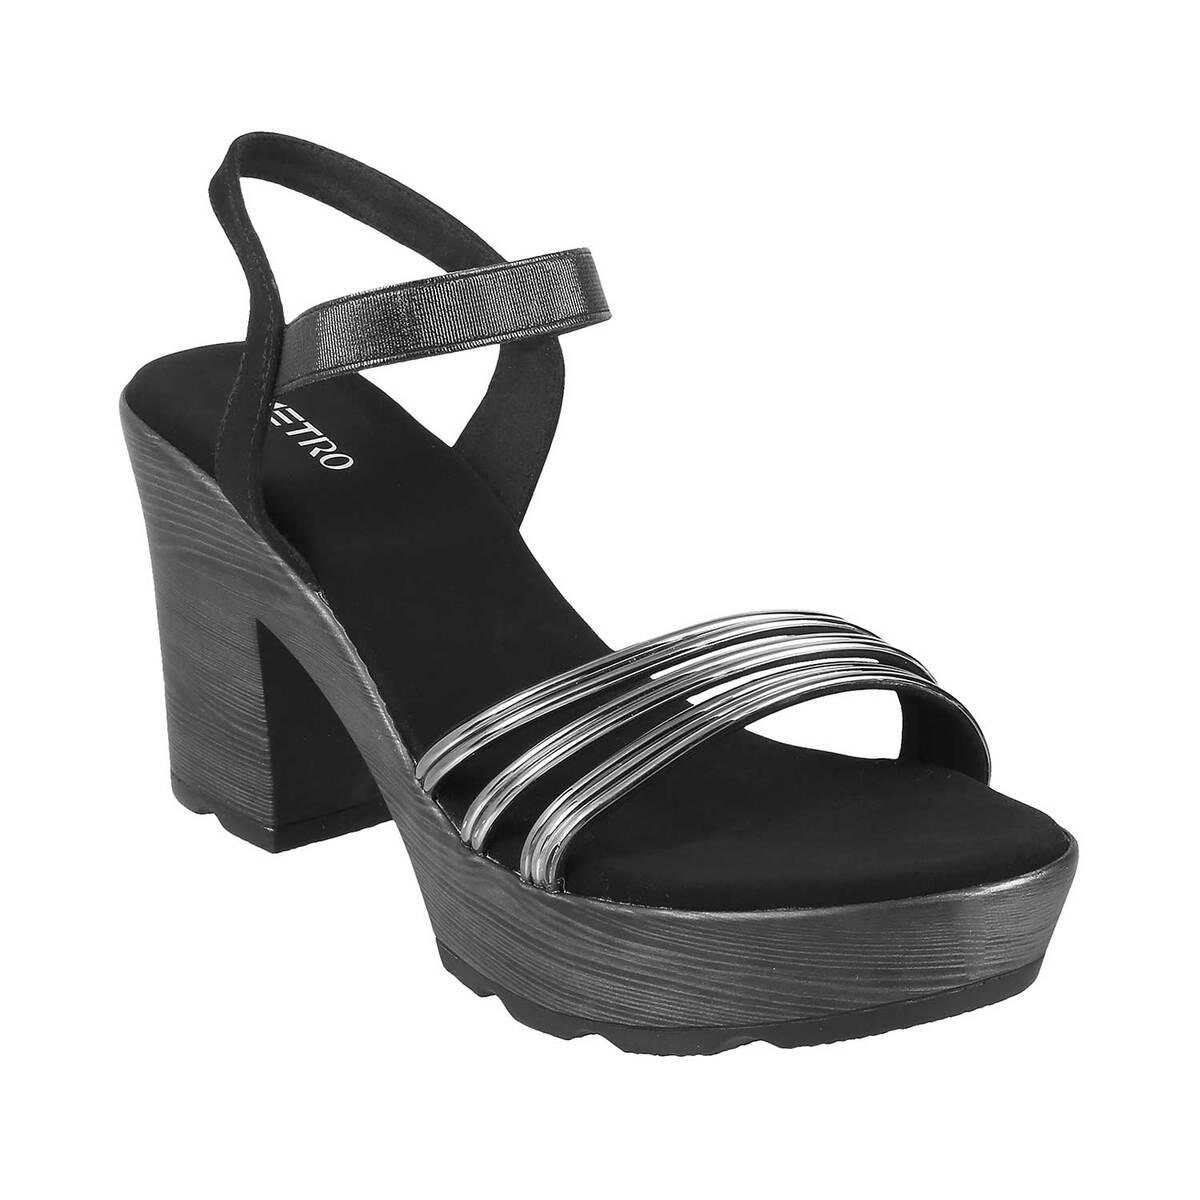 Buy Mochi Womens Synthetic Black Sandals (Size (3 UK (36 EU)) at Amazon.in